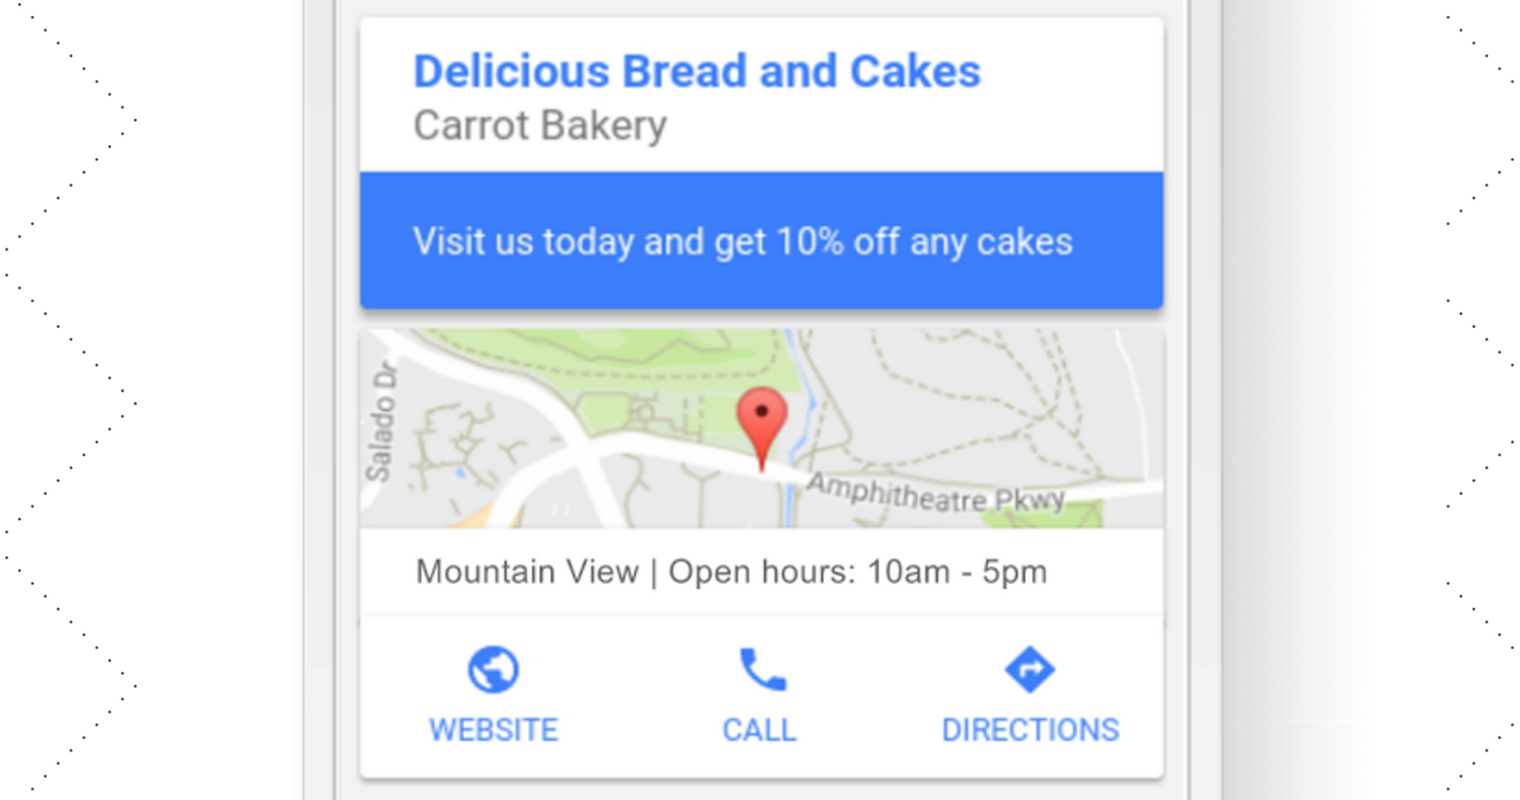 Google Display Ads to Show Location Extensions for Local Businesses